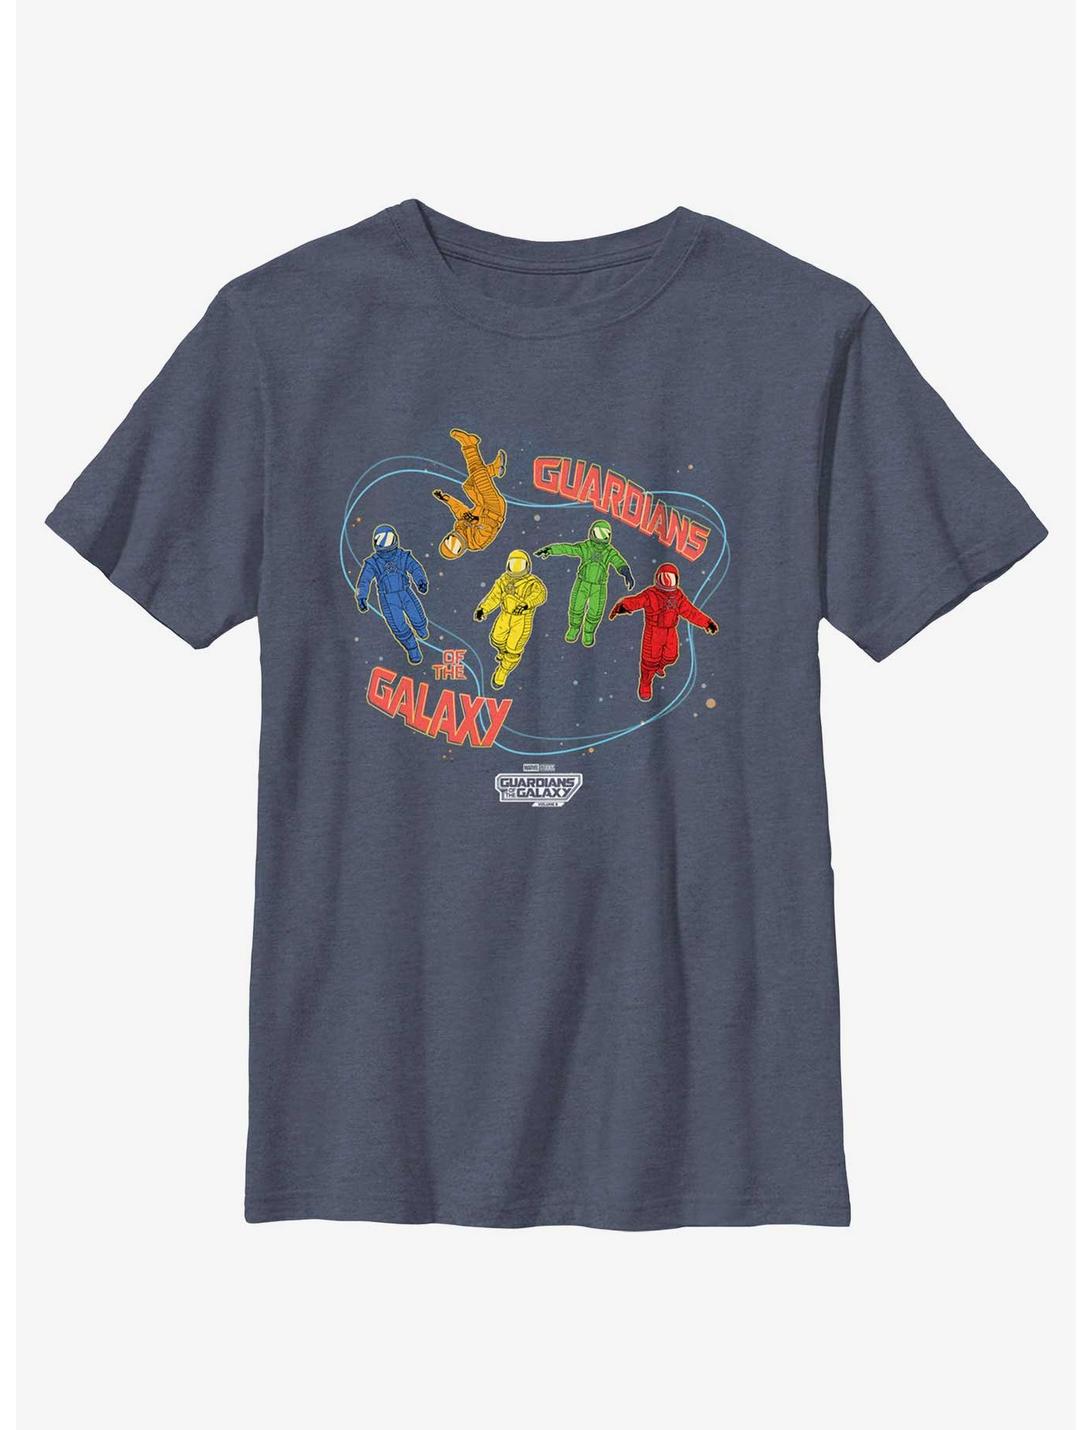 Guardians Of The Galaxy Vol. 3 Astronauts In Space Youth T-Shirt, NAVY HTR, hi-res